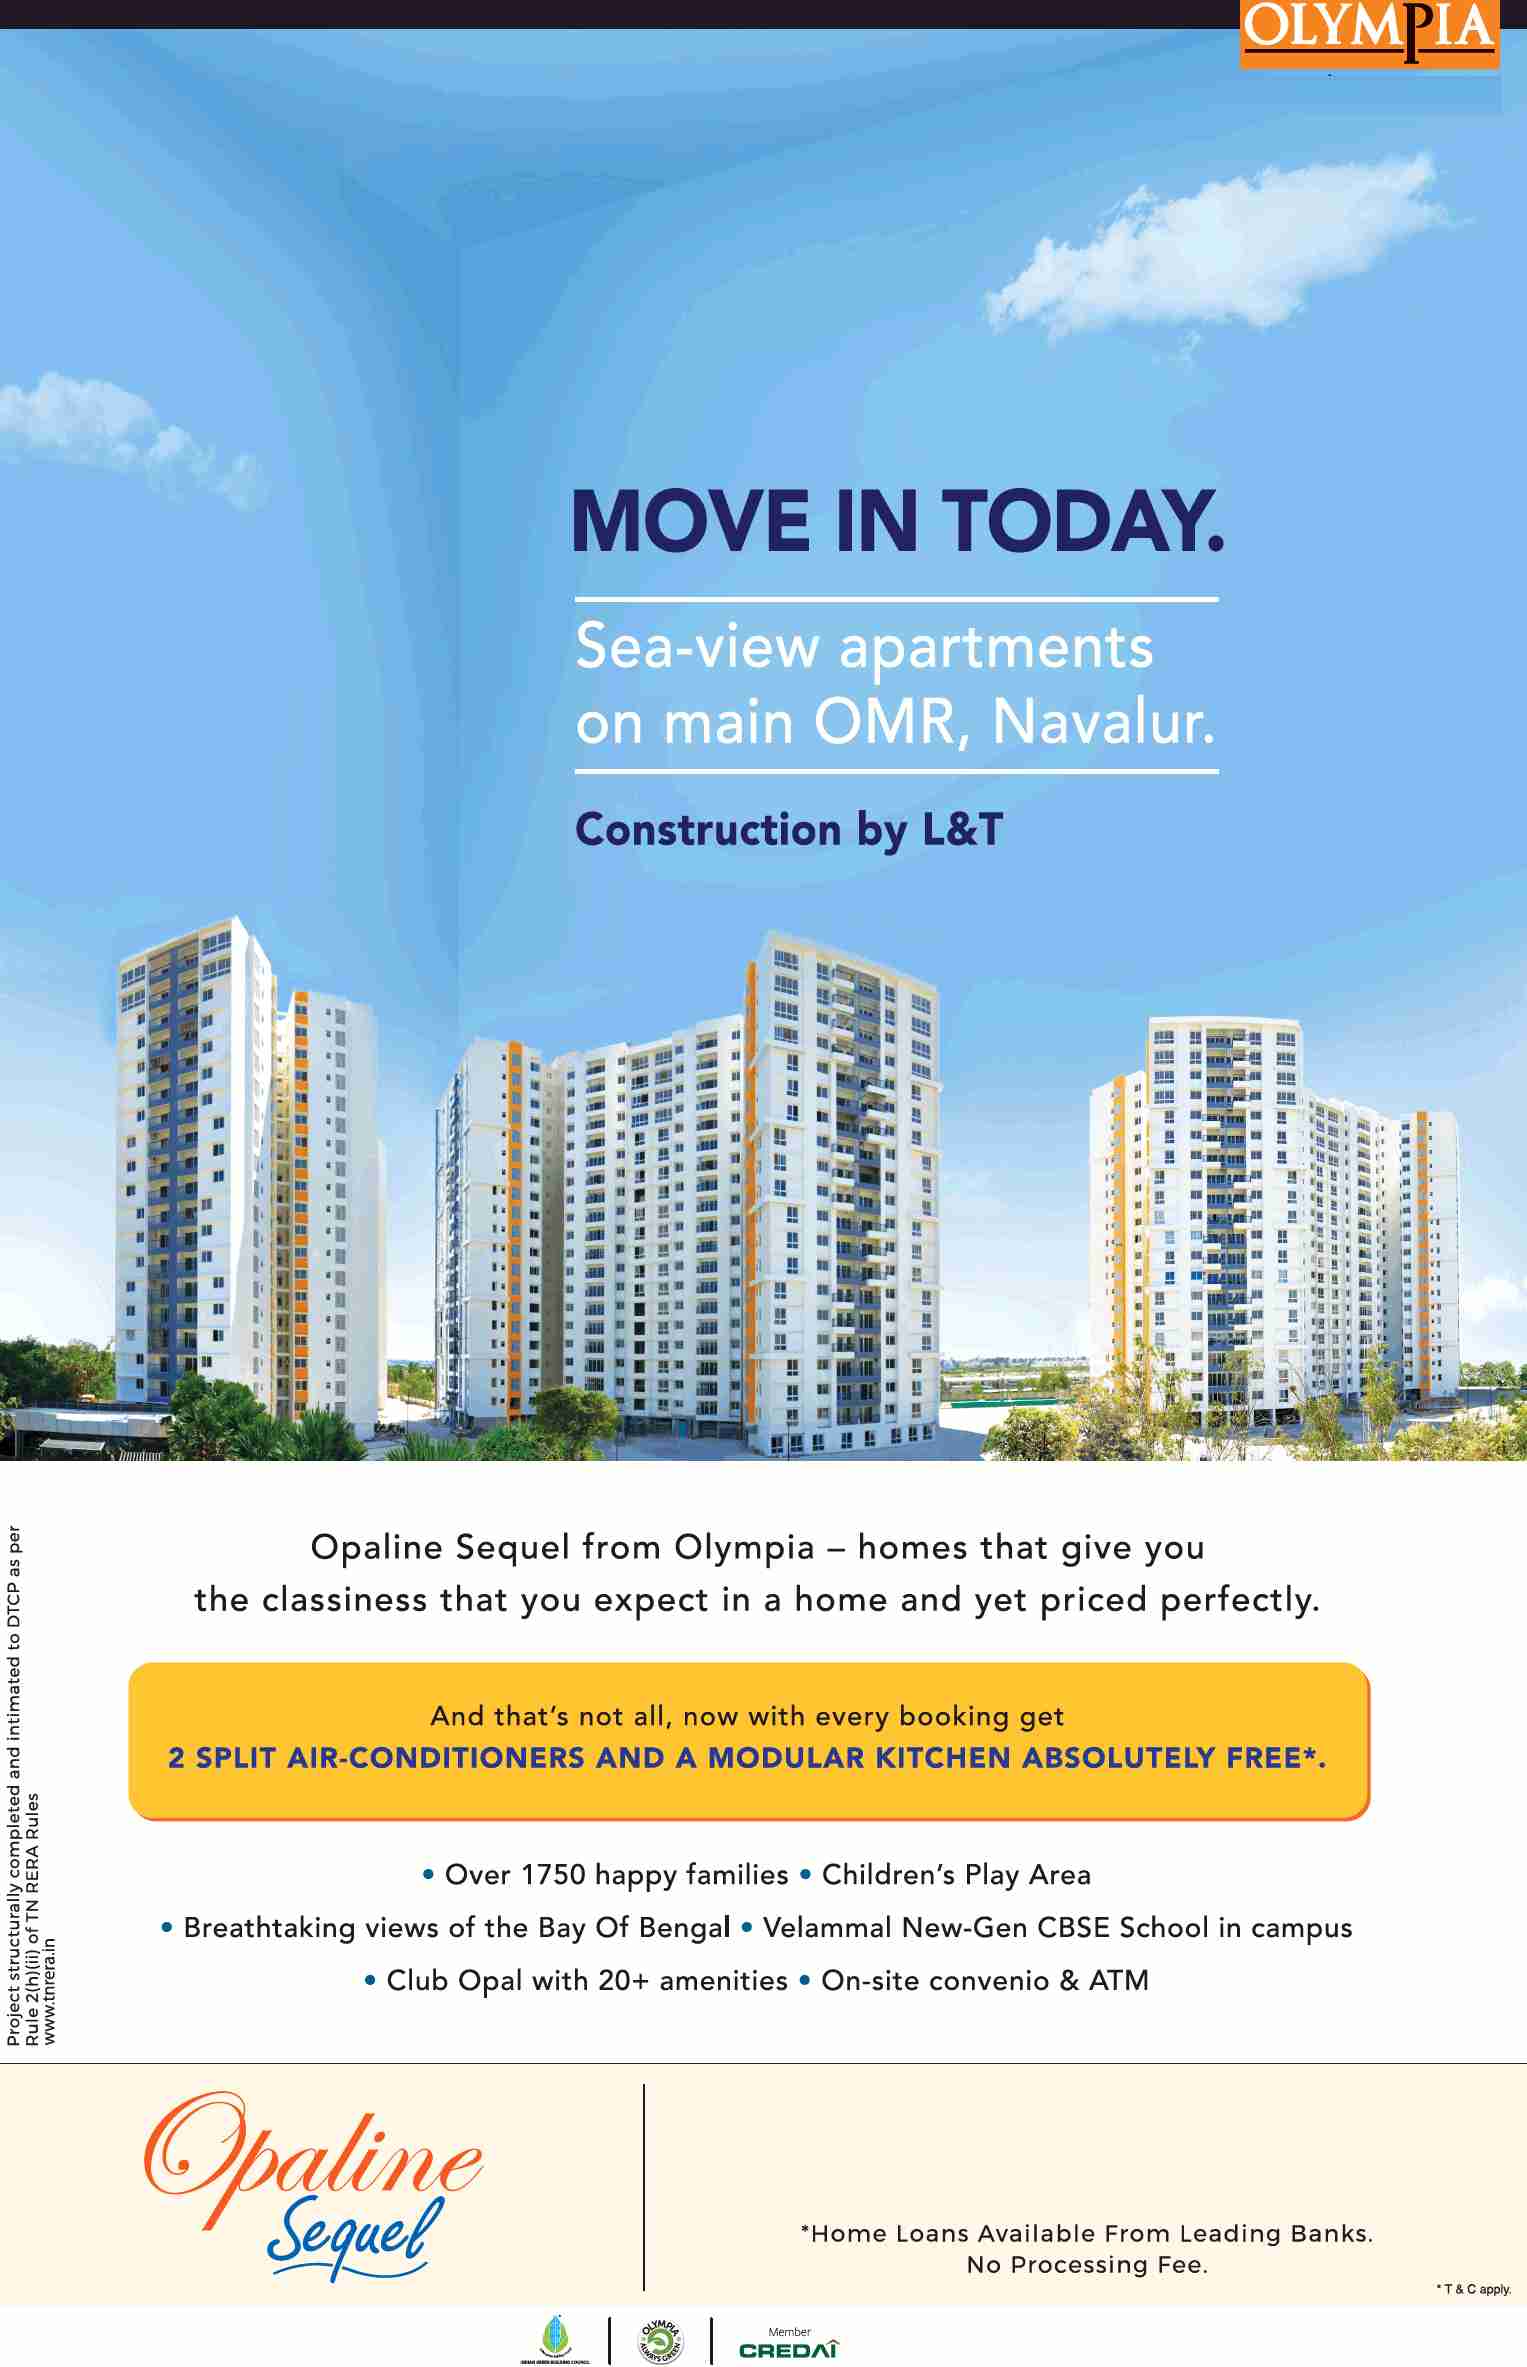 Get 2 split air-conditioner & modular kitchen free with every booking at Olympia Opaline Sequel in Chennai Update